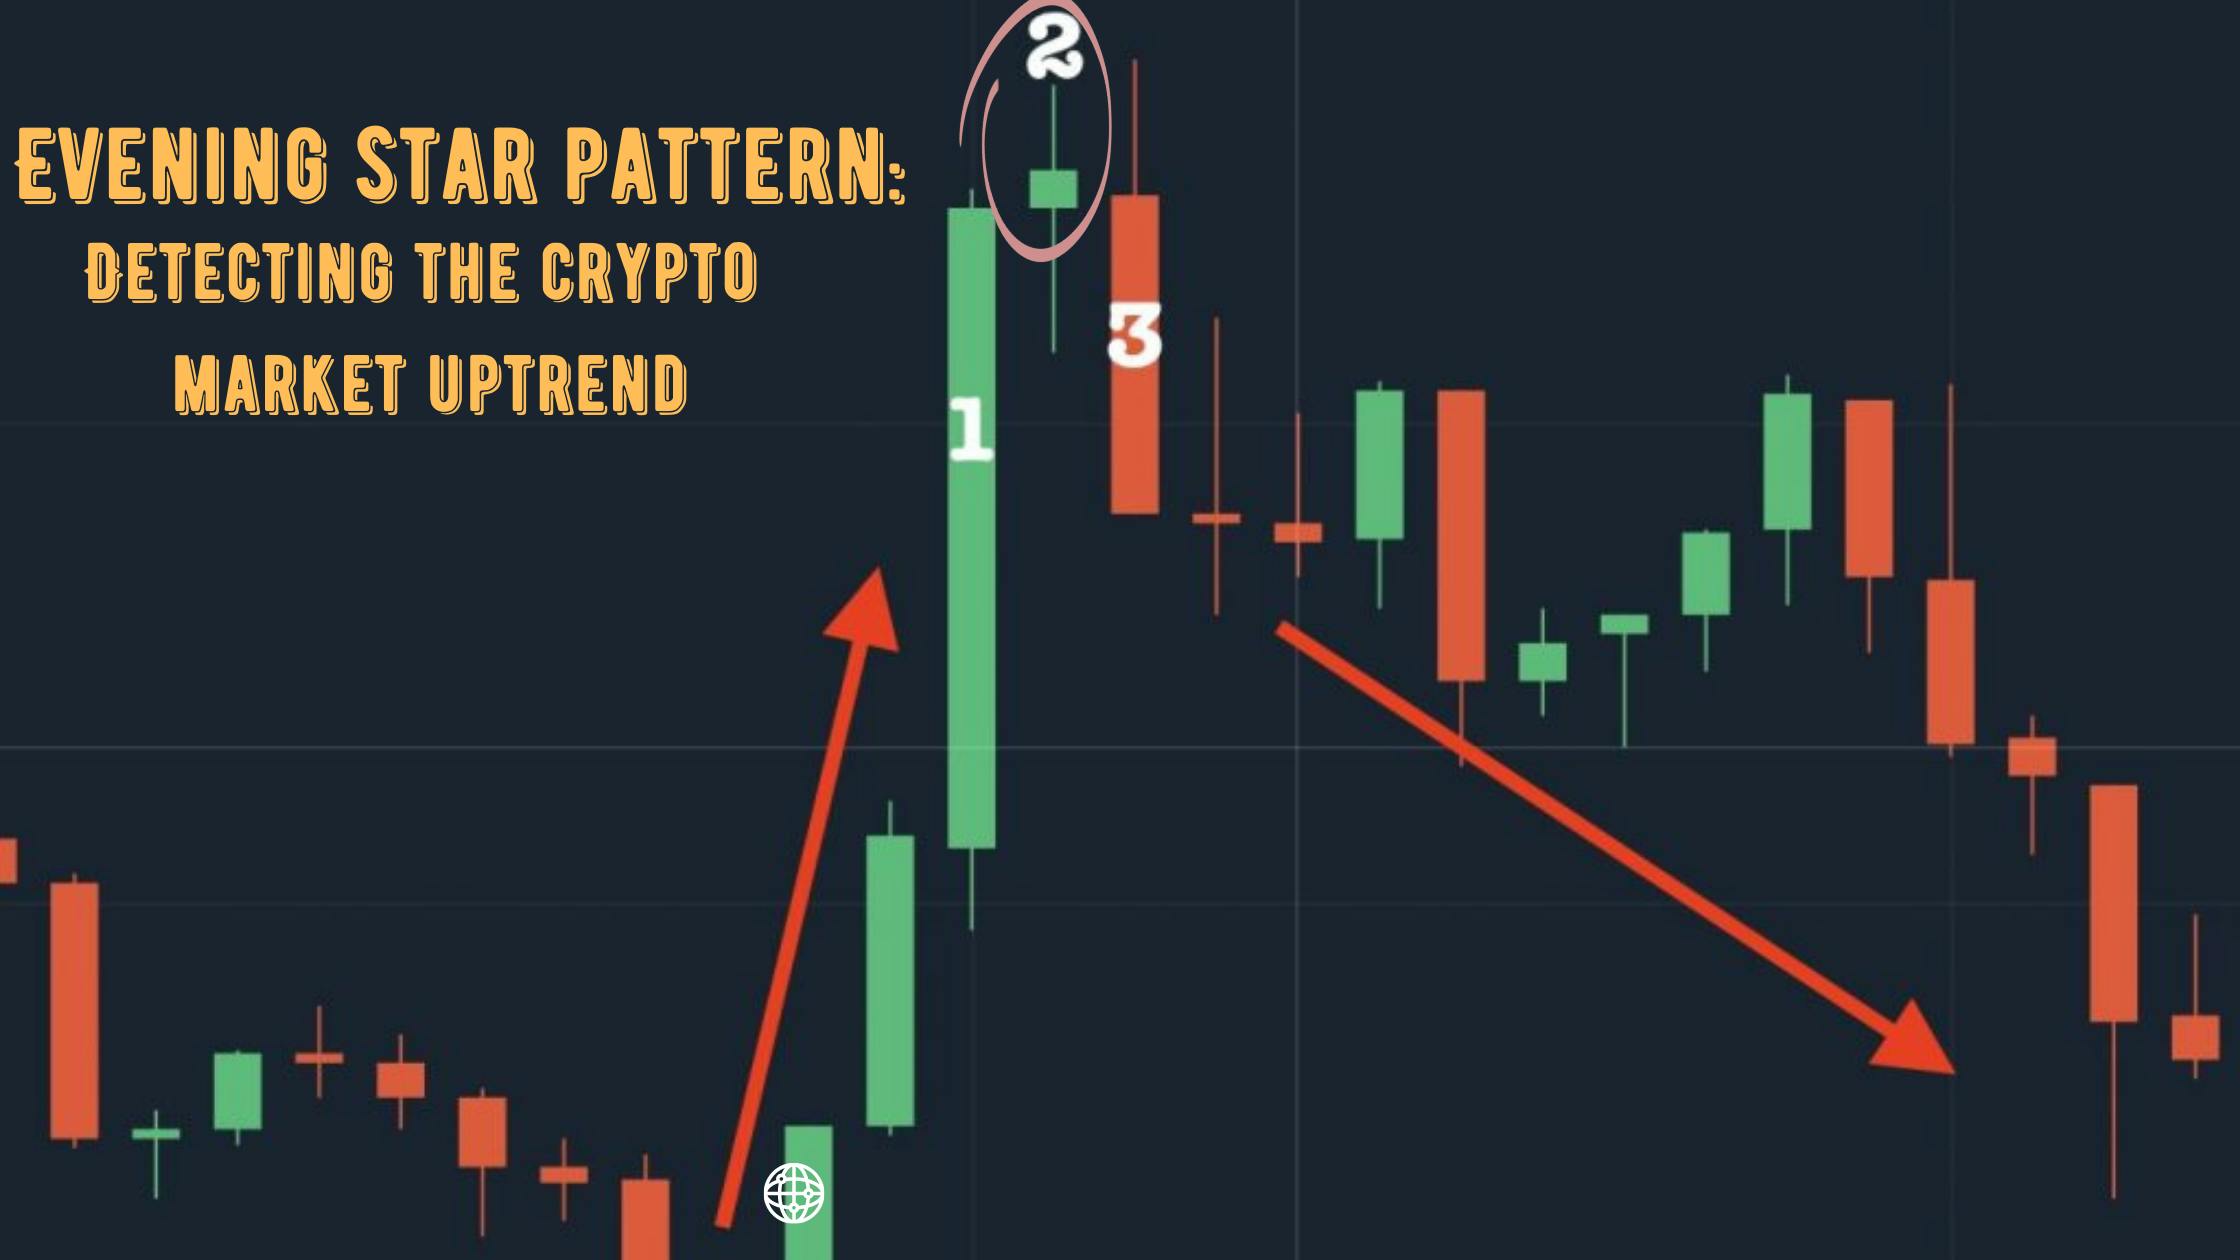 Evening star pattern: Detecting the crypto market uptrend